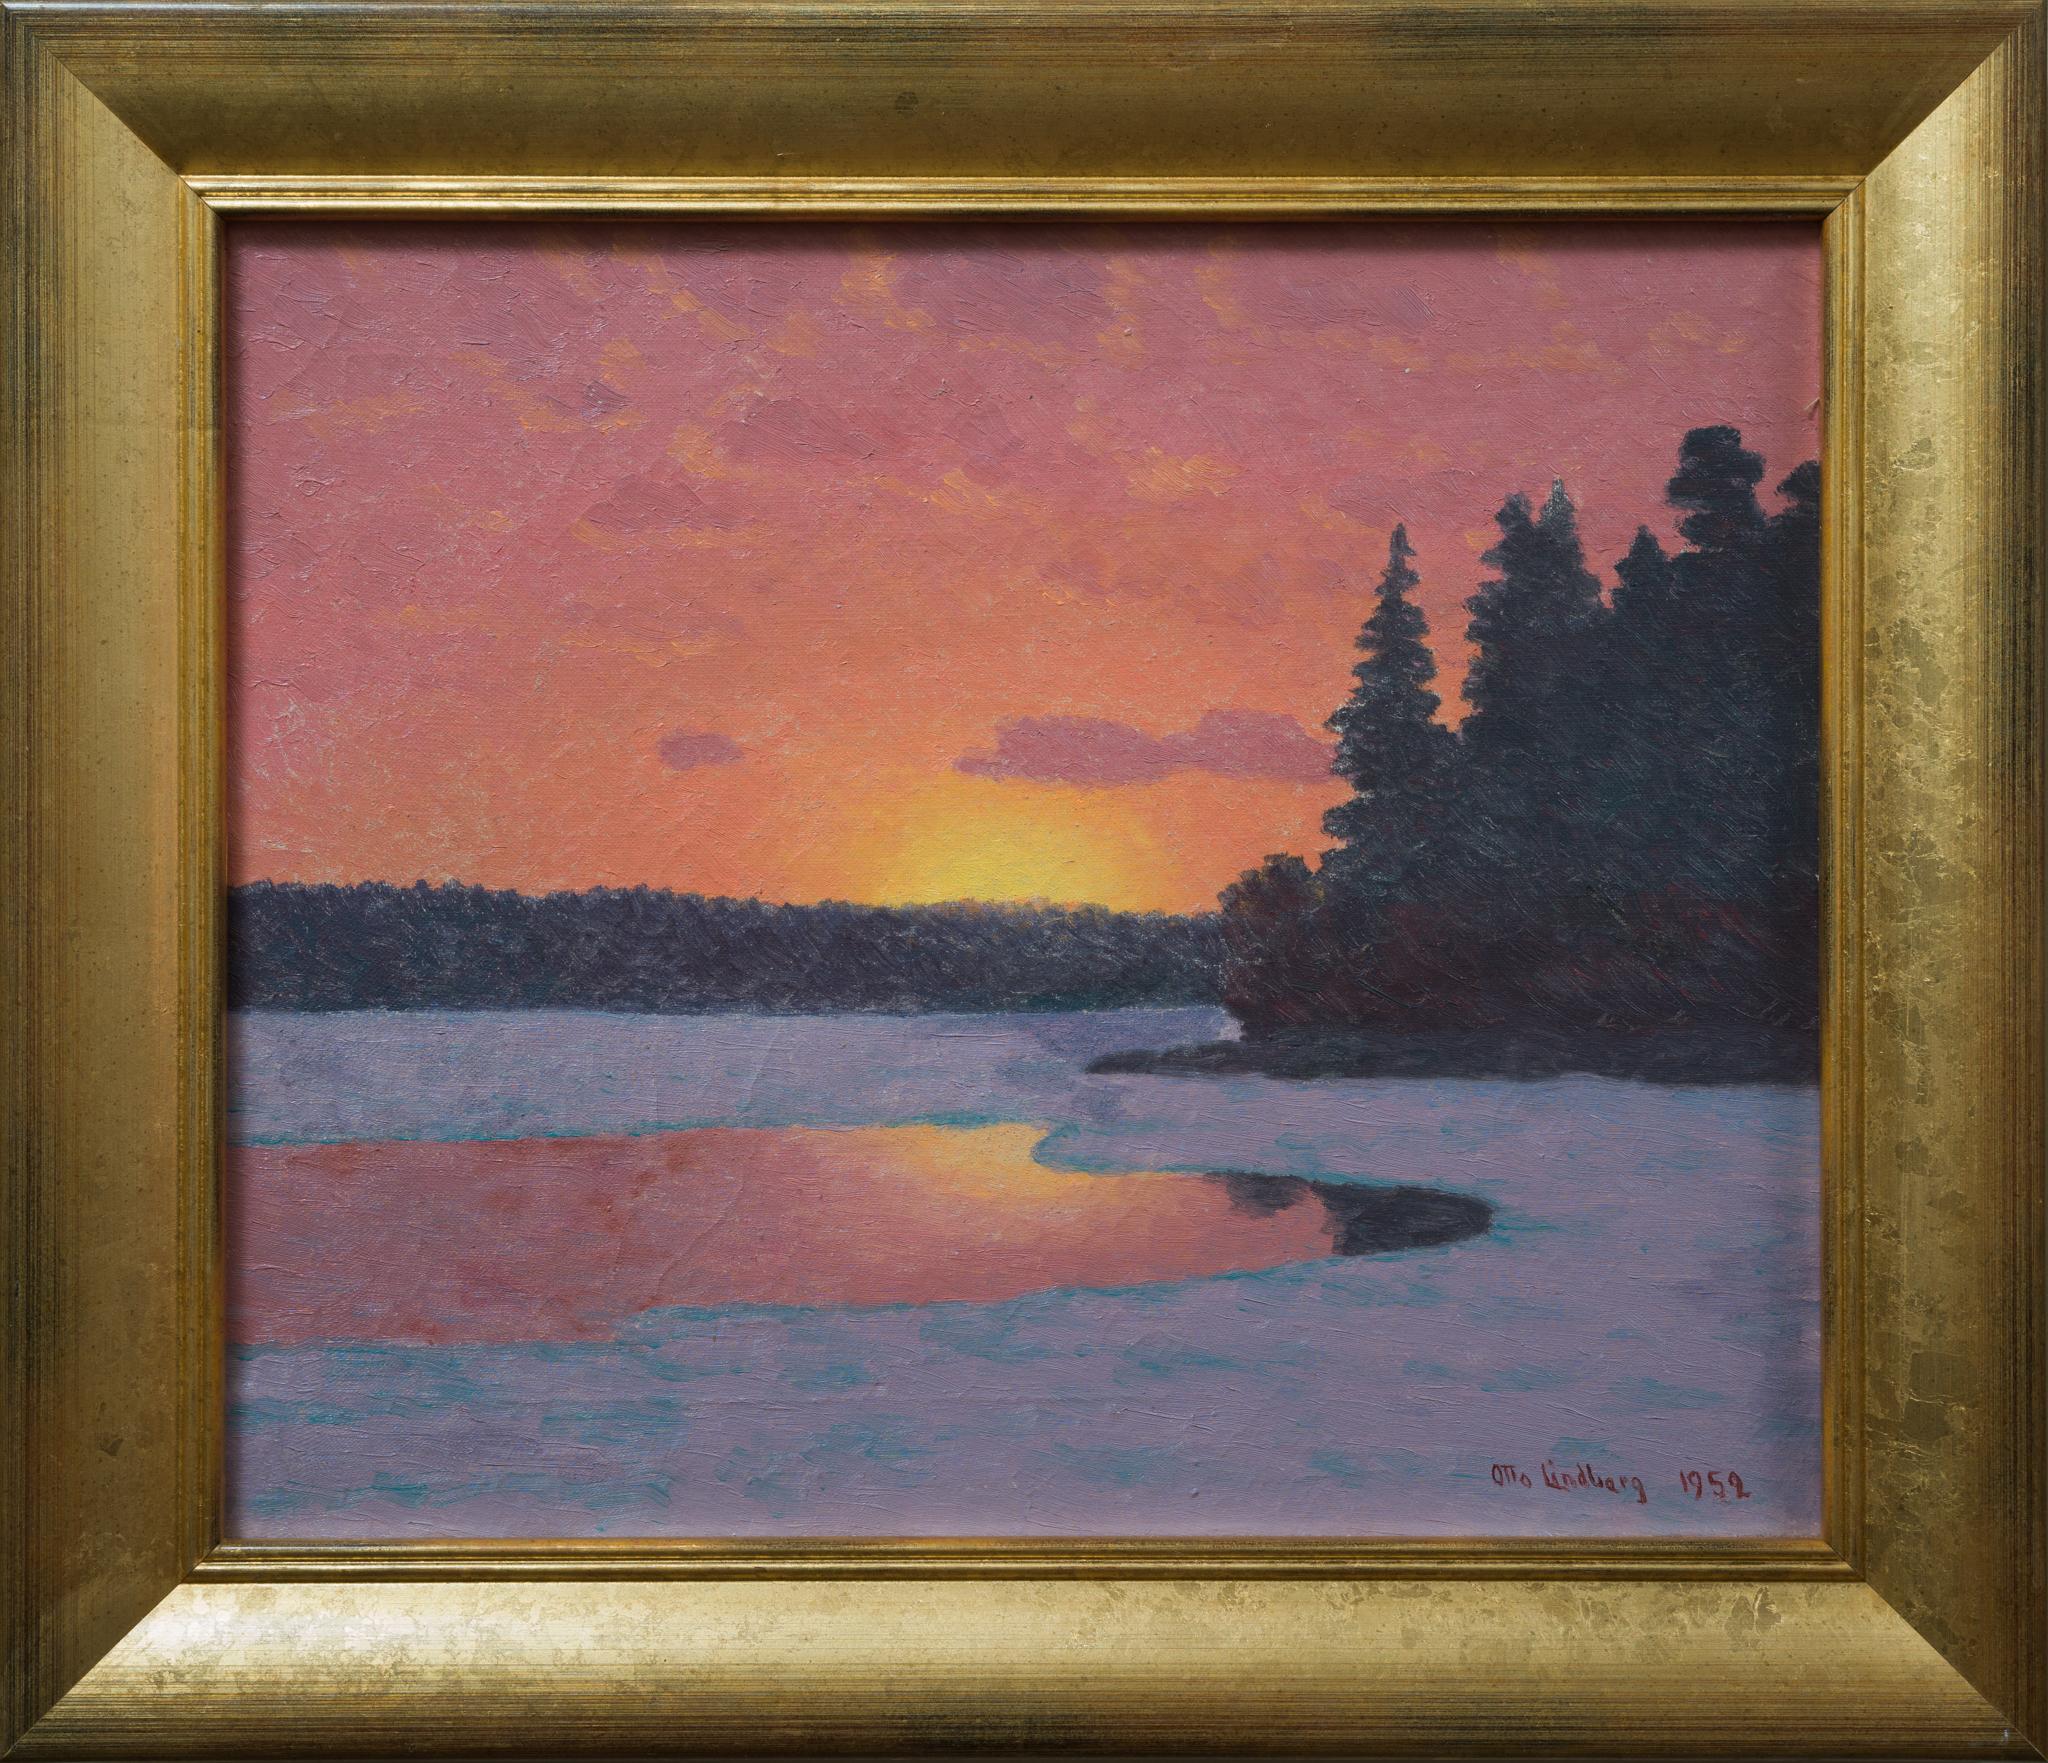 Otto Lindberg Landscape Painting - A Spring Sunset, Original Oil Painting from 1952